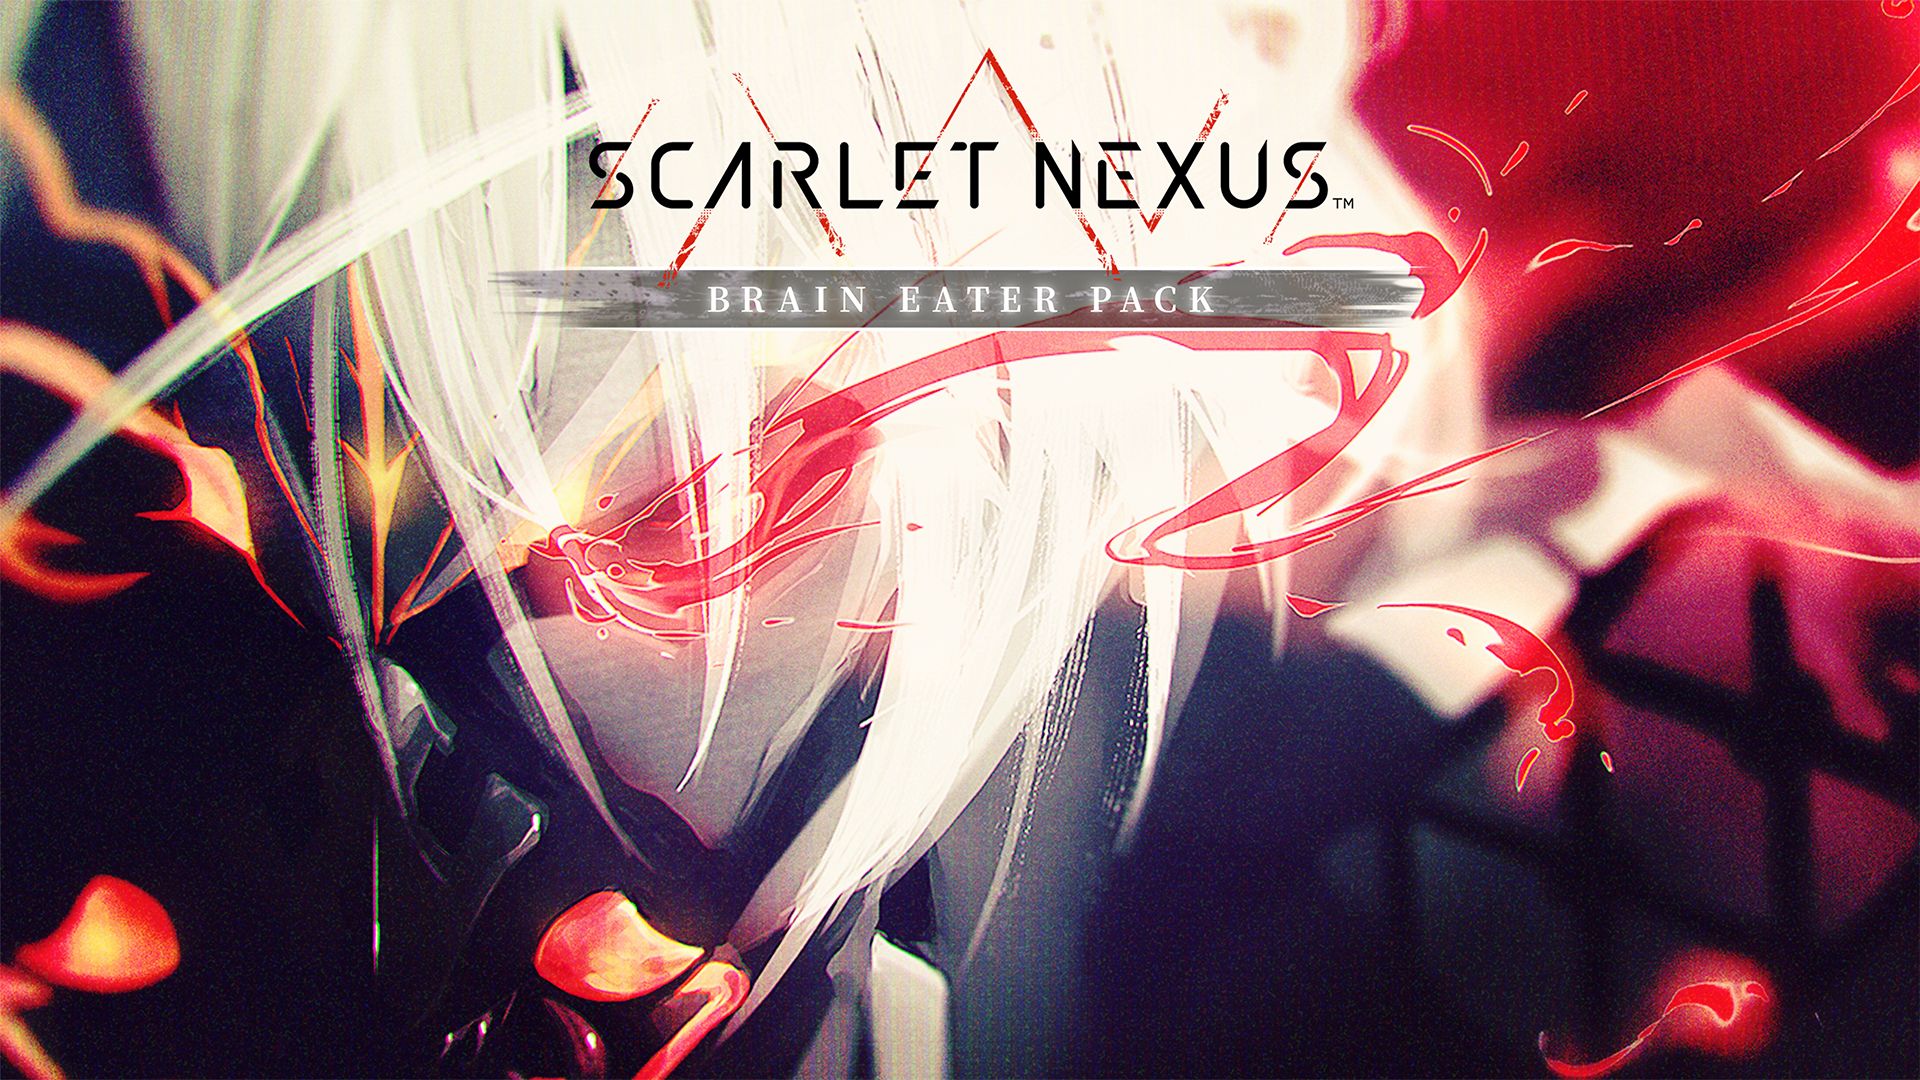 “Brain Eater Pack” & Free Update 1.07 Are Available For SCARLET NEXUS